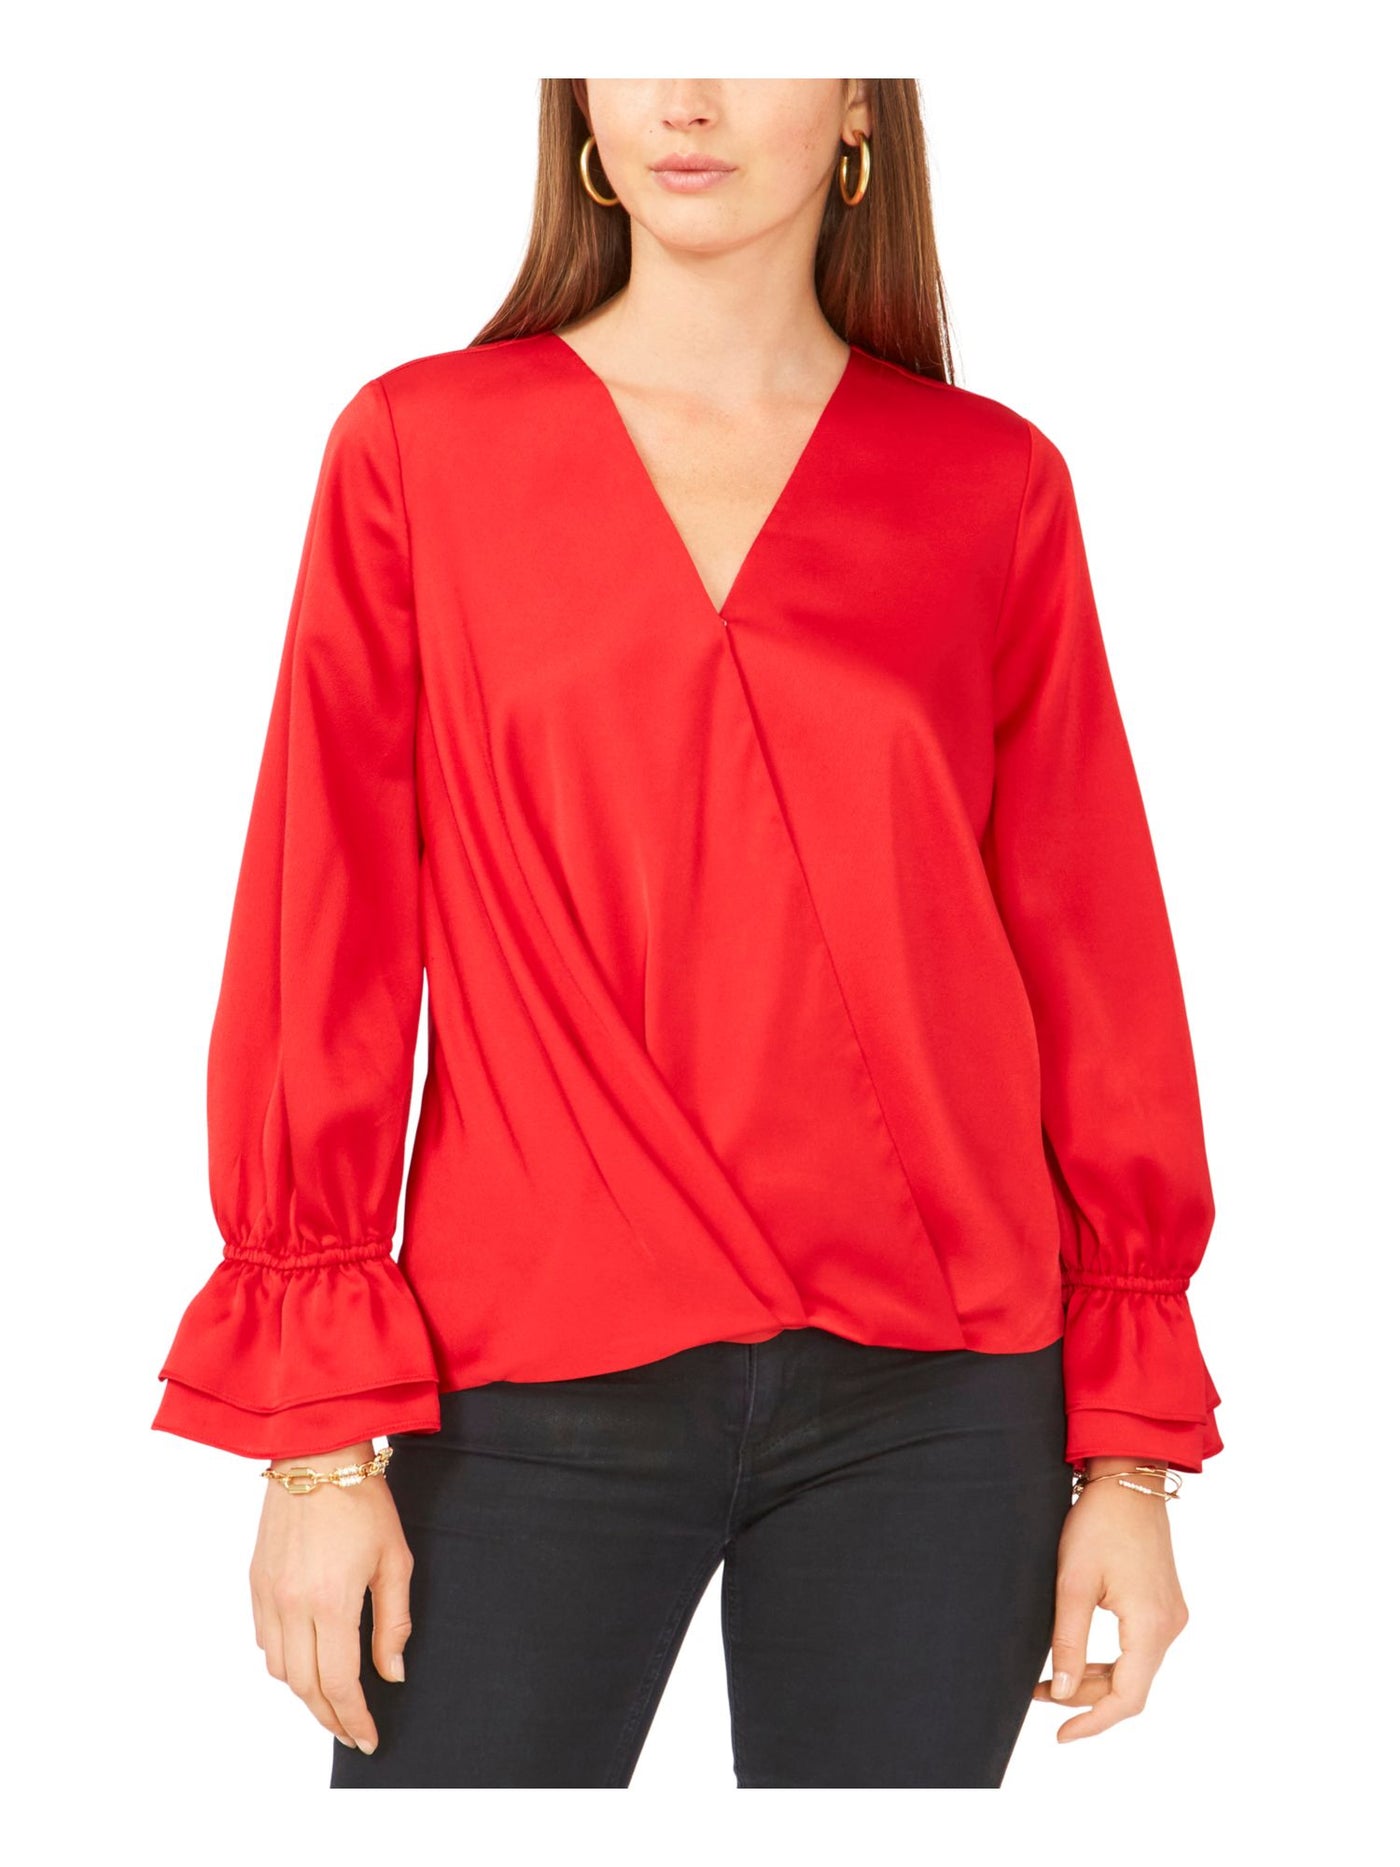 VINCE CAMUTO Womens Red Sheer Ruffled-cuff Long Sleeve Surplice Neckline Wear To Work Faux Wrap Top S